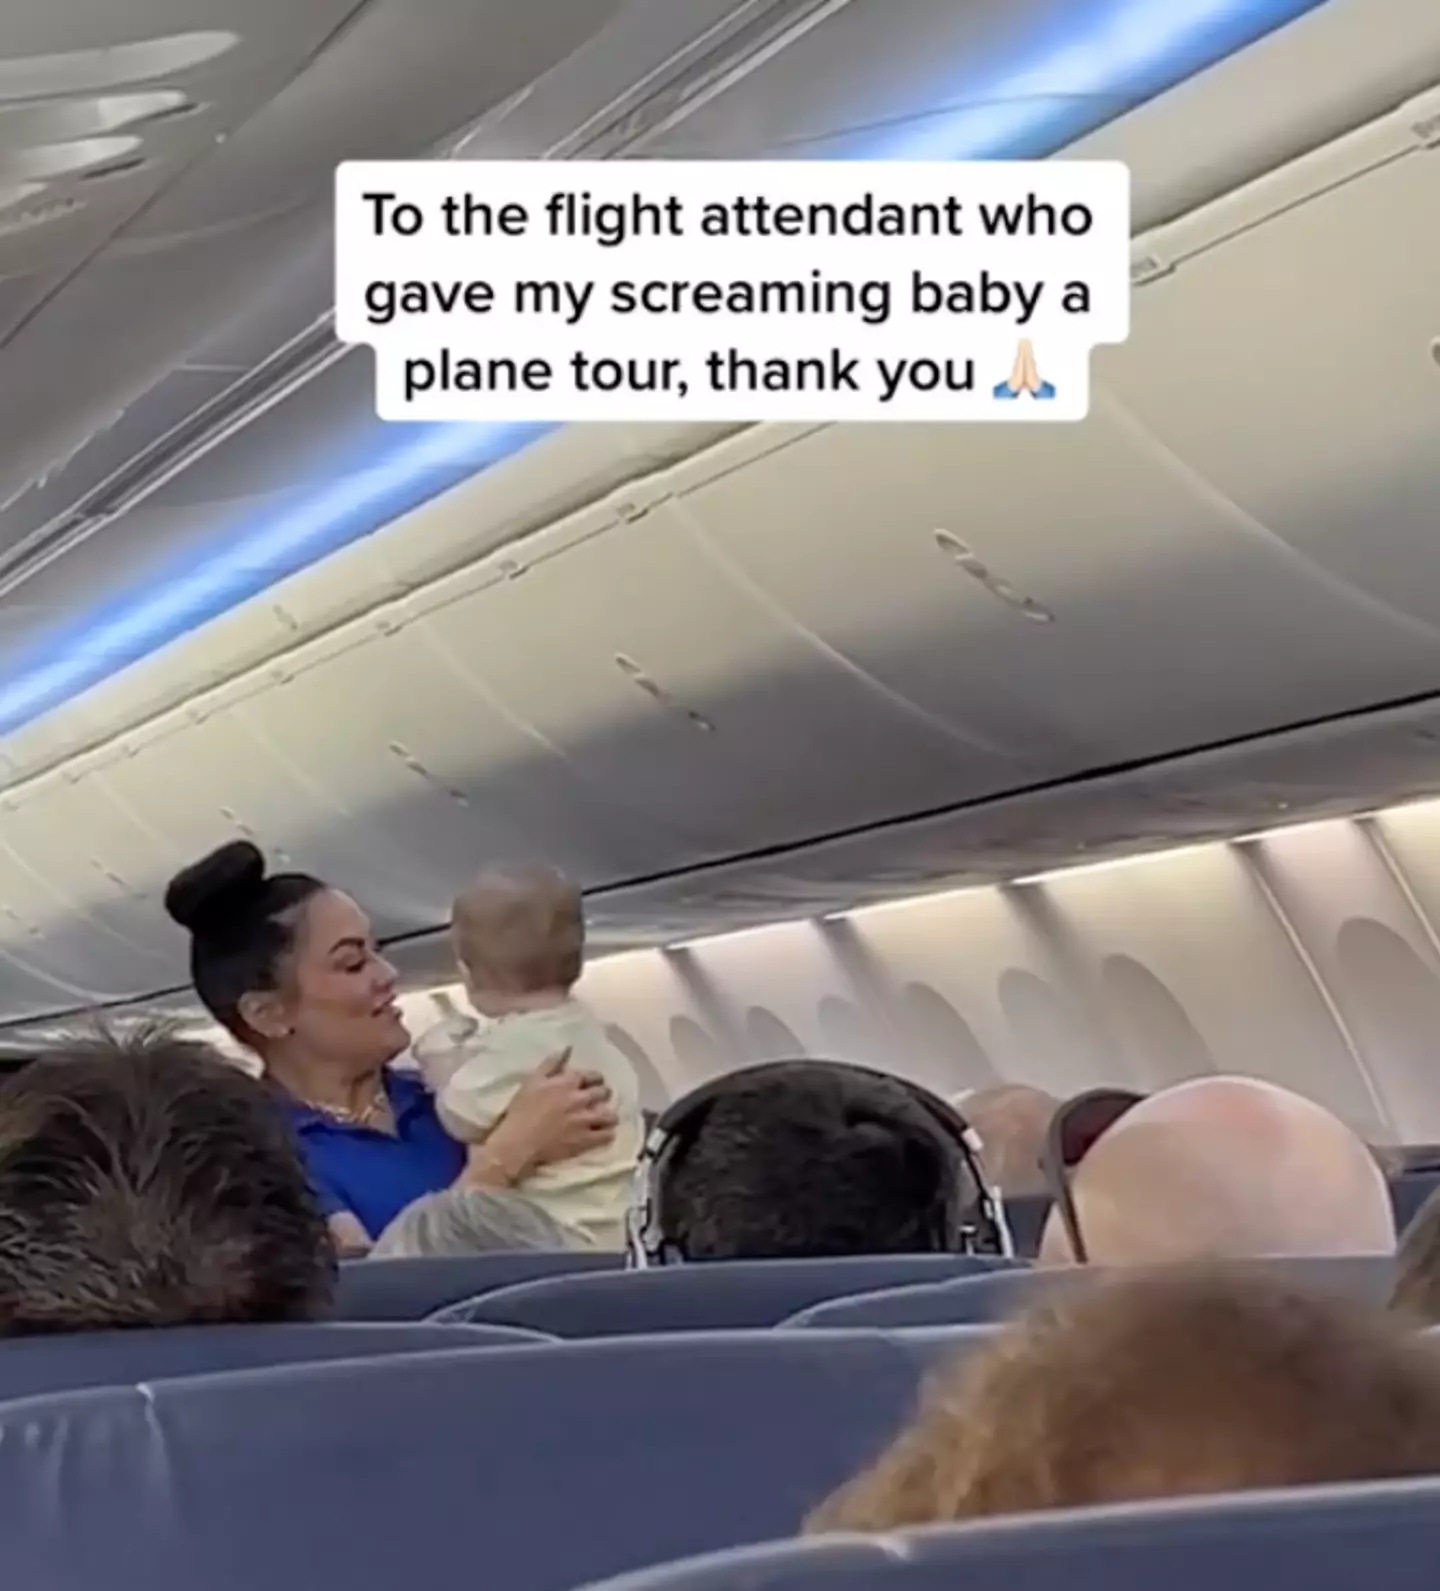 A flight attendant has been praised for helping a new mum with her baby.